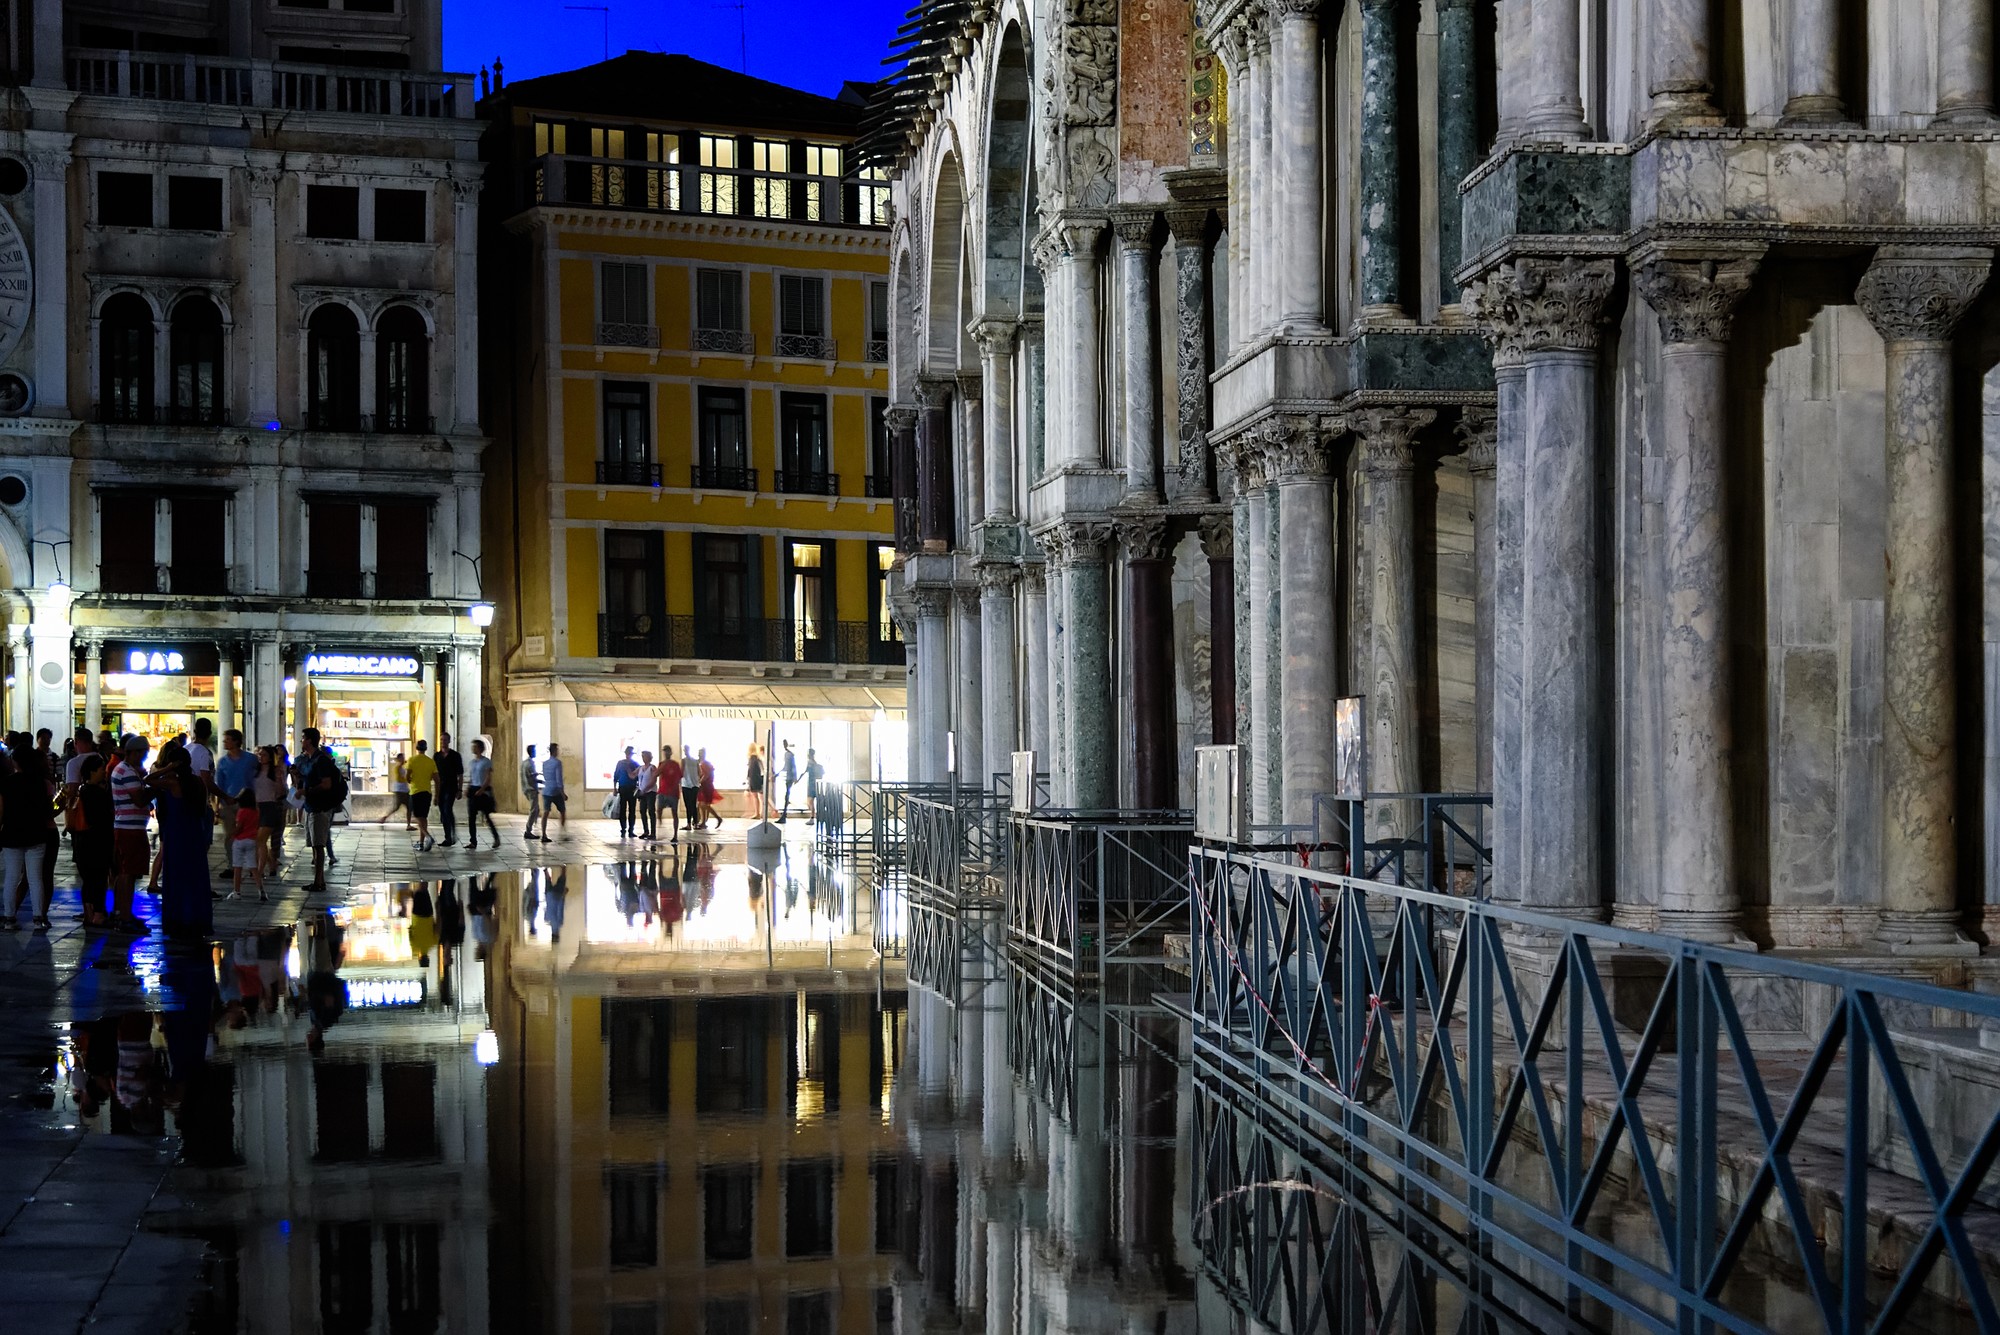 Outside the Nest: Venice floods continue, government declares state of emergency